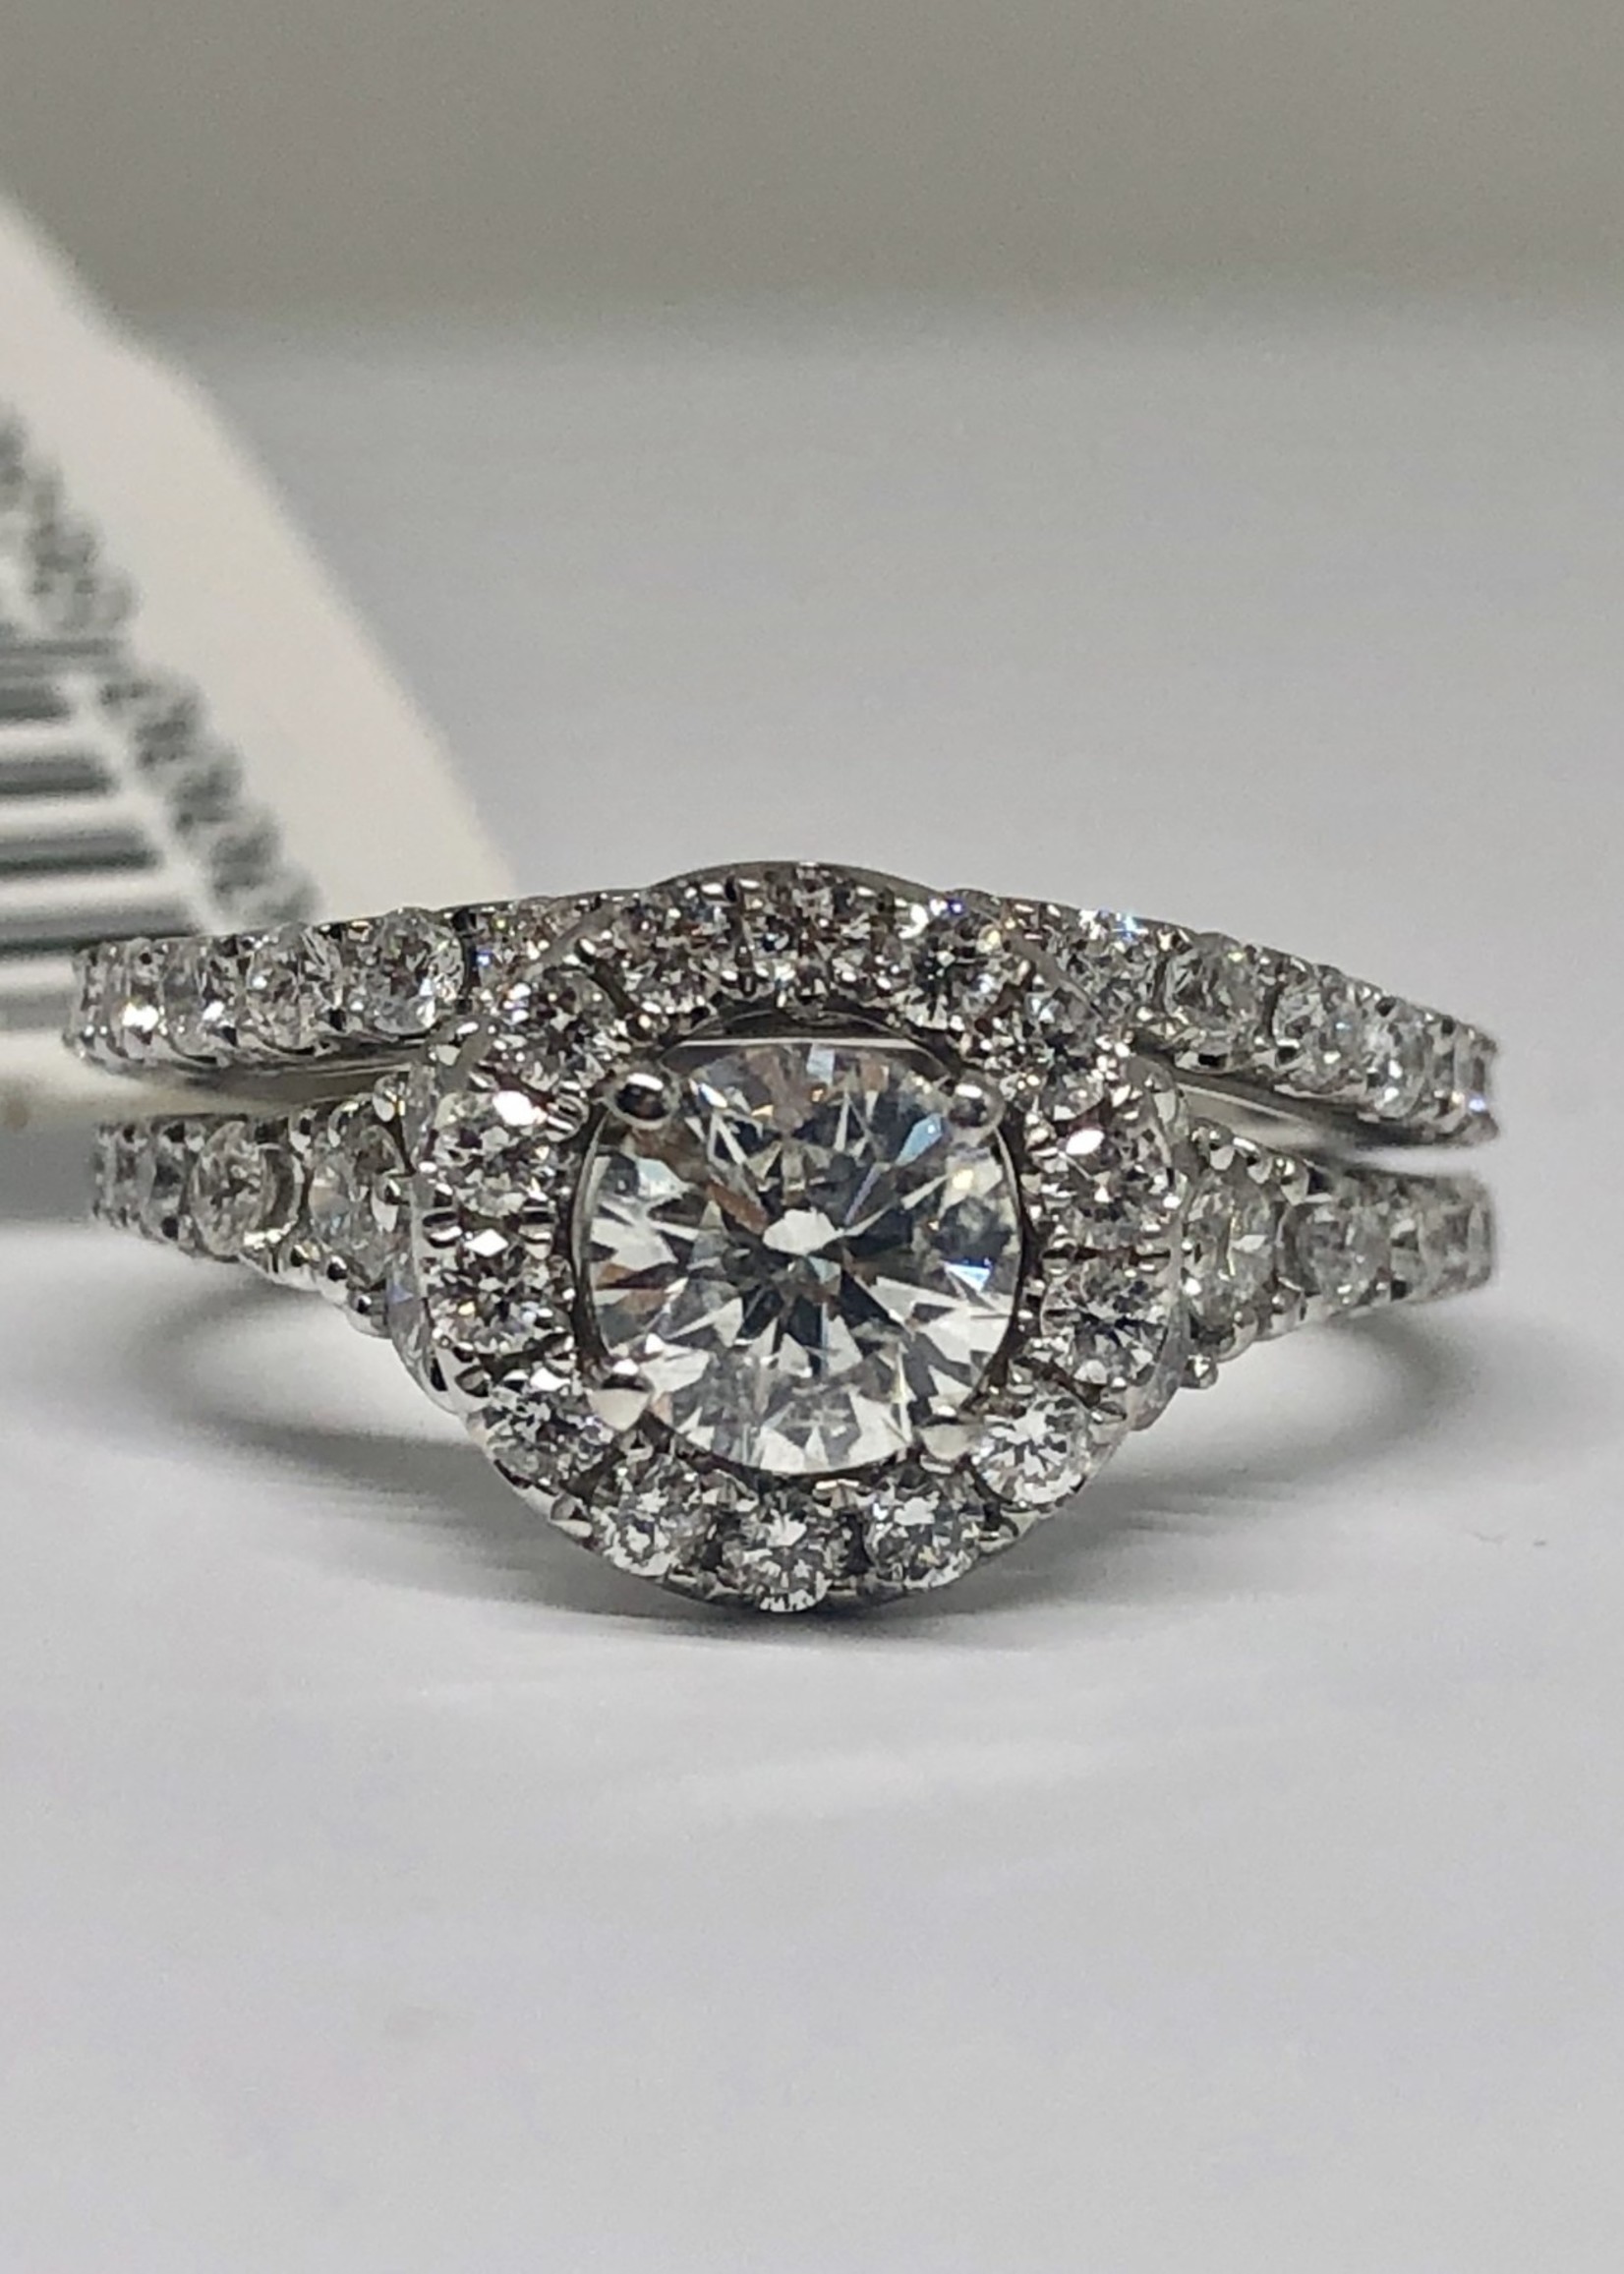 14KW 4.4g 1.20ctw (.52ctr) H/SI2 Round Diamond Halo Engagement Ring (size 5)